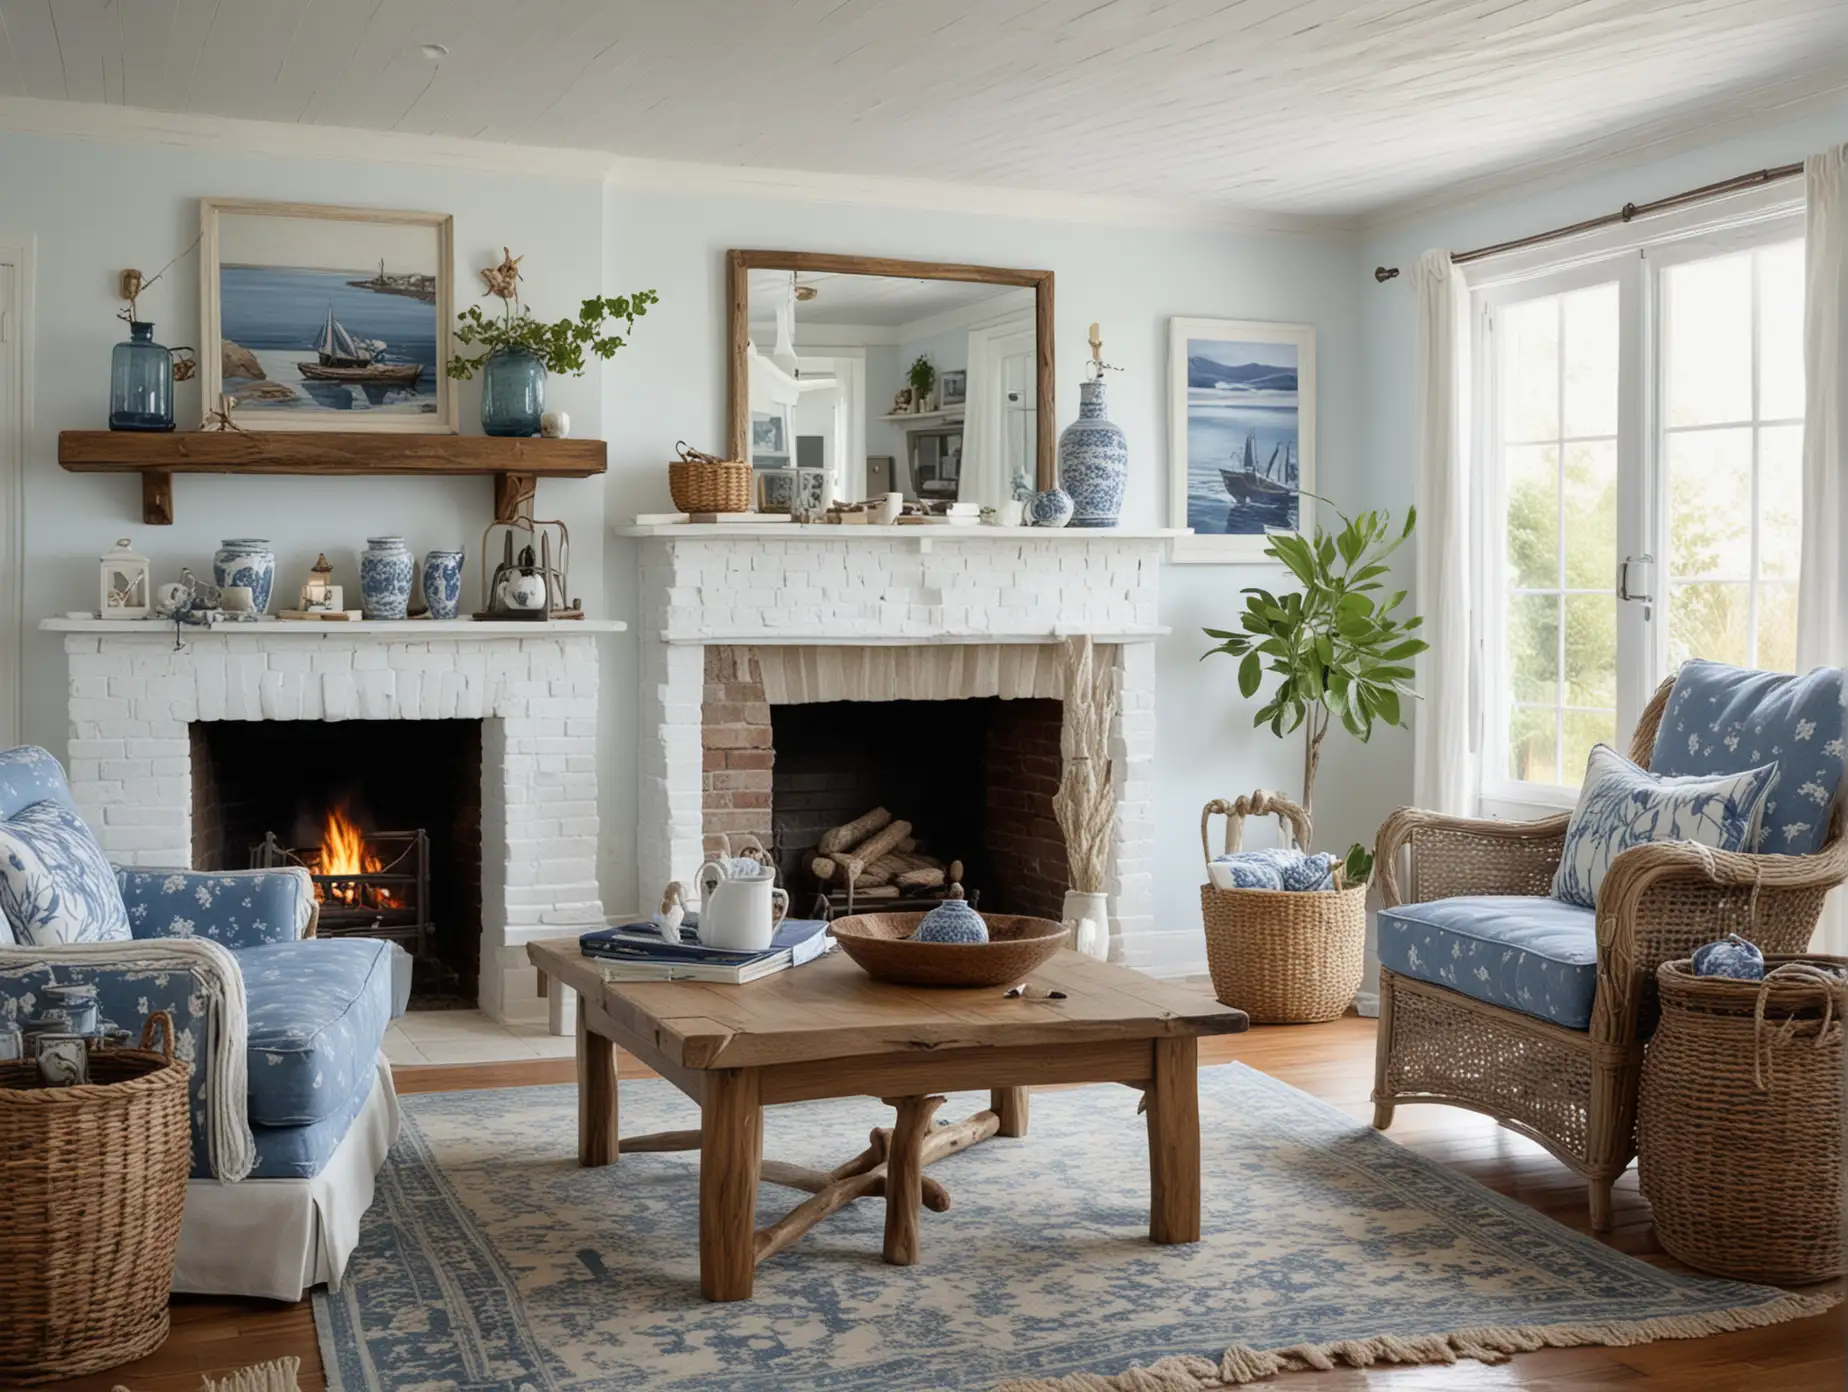 Vintage-Coastal-Sitting-Room-with-Driftwood-Furniture-and-Nautical-Accents